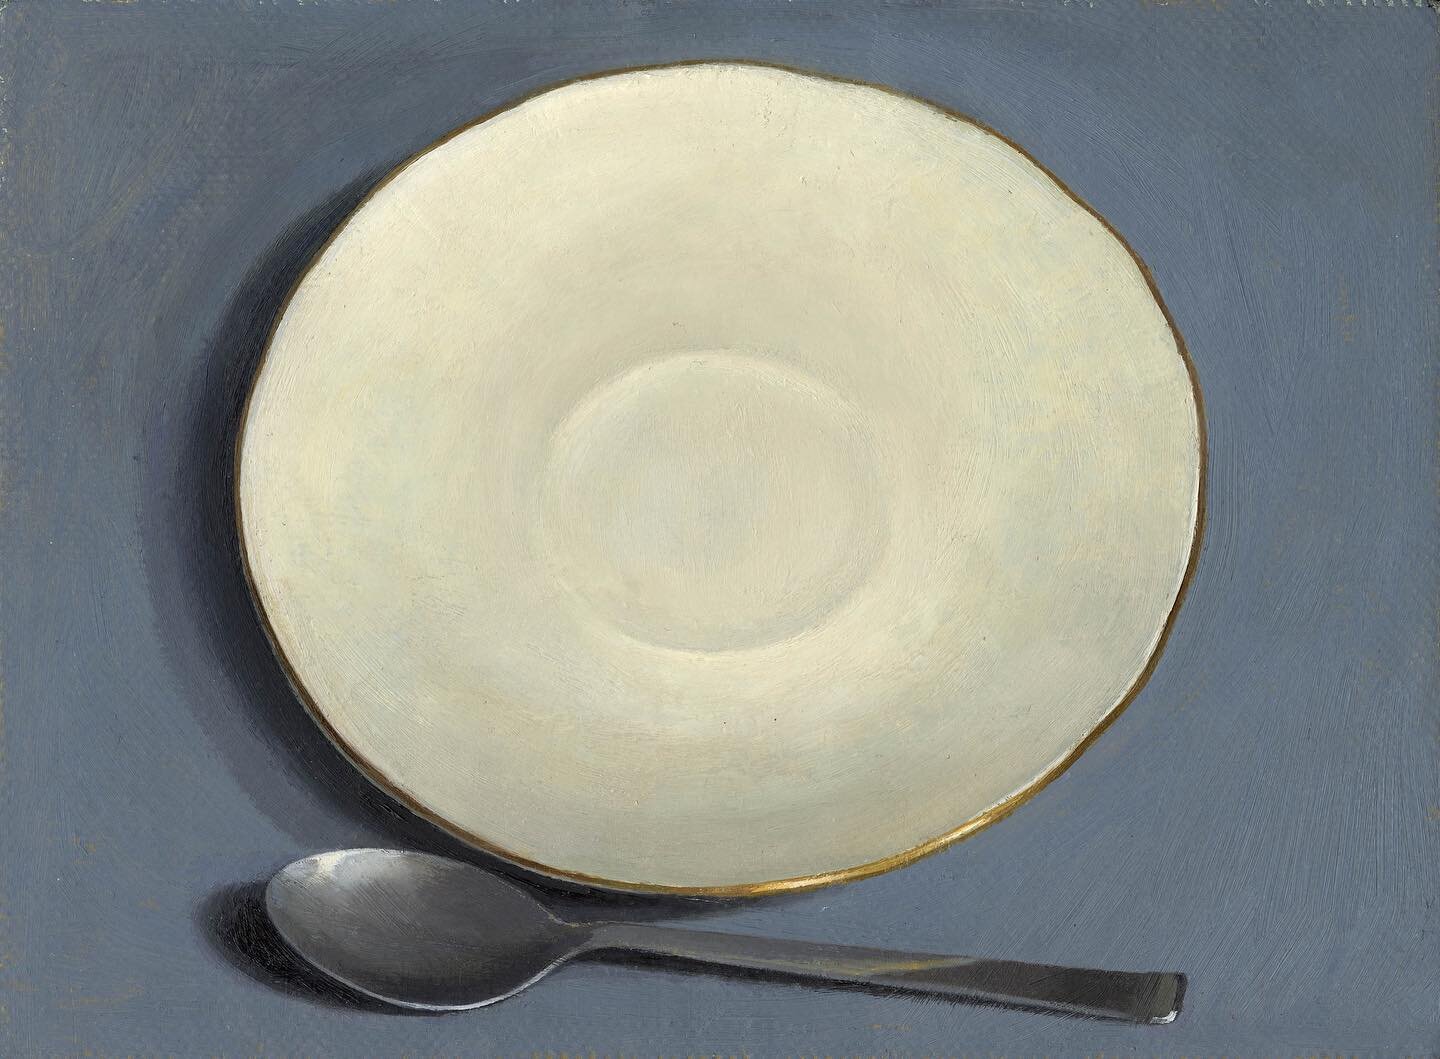 2020
Dish and Spoon
Oil on canvas laid on panel 
21.5 x 29 cm

#stilllifepainting #oilpainting #dish #spoon